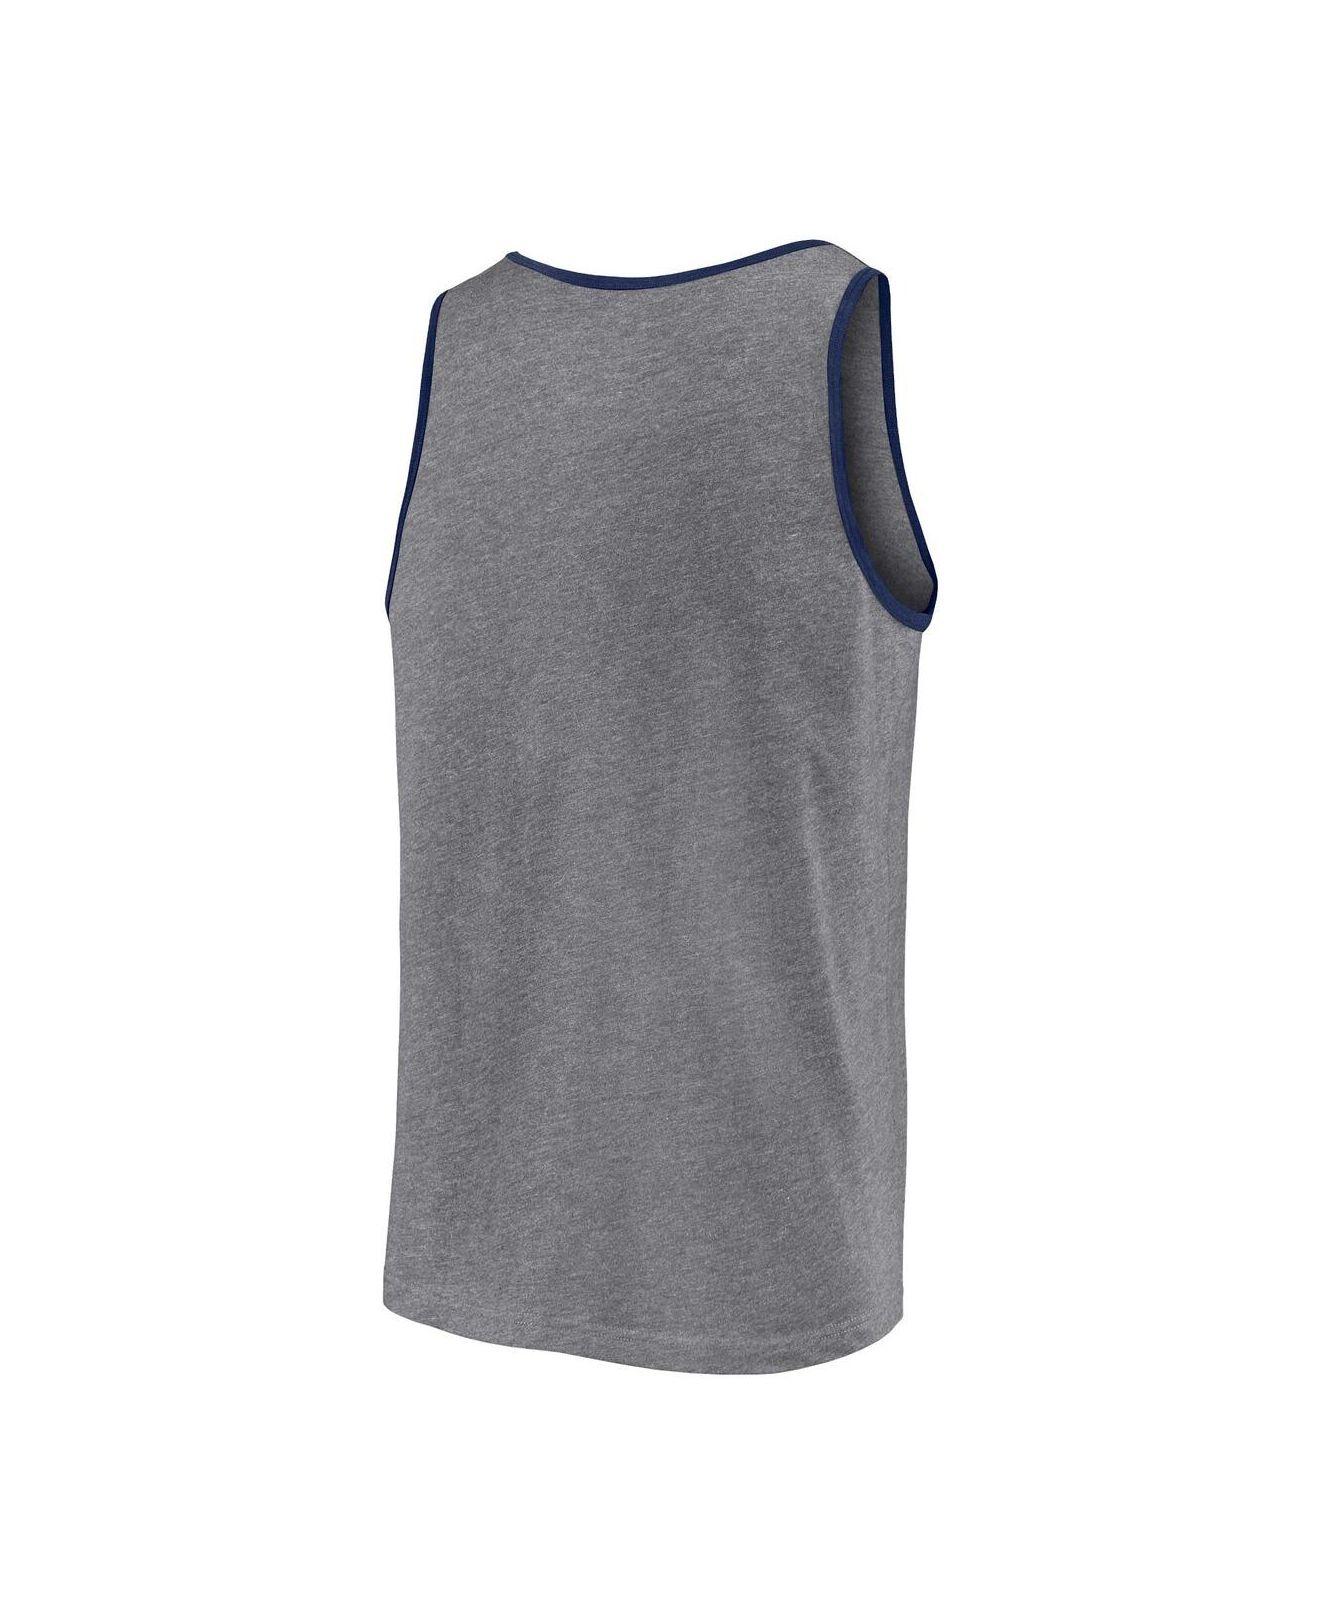 New York Yankees Profile Big & Tall Arch Over Logo Tank Top